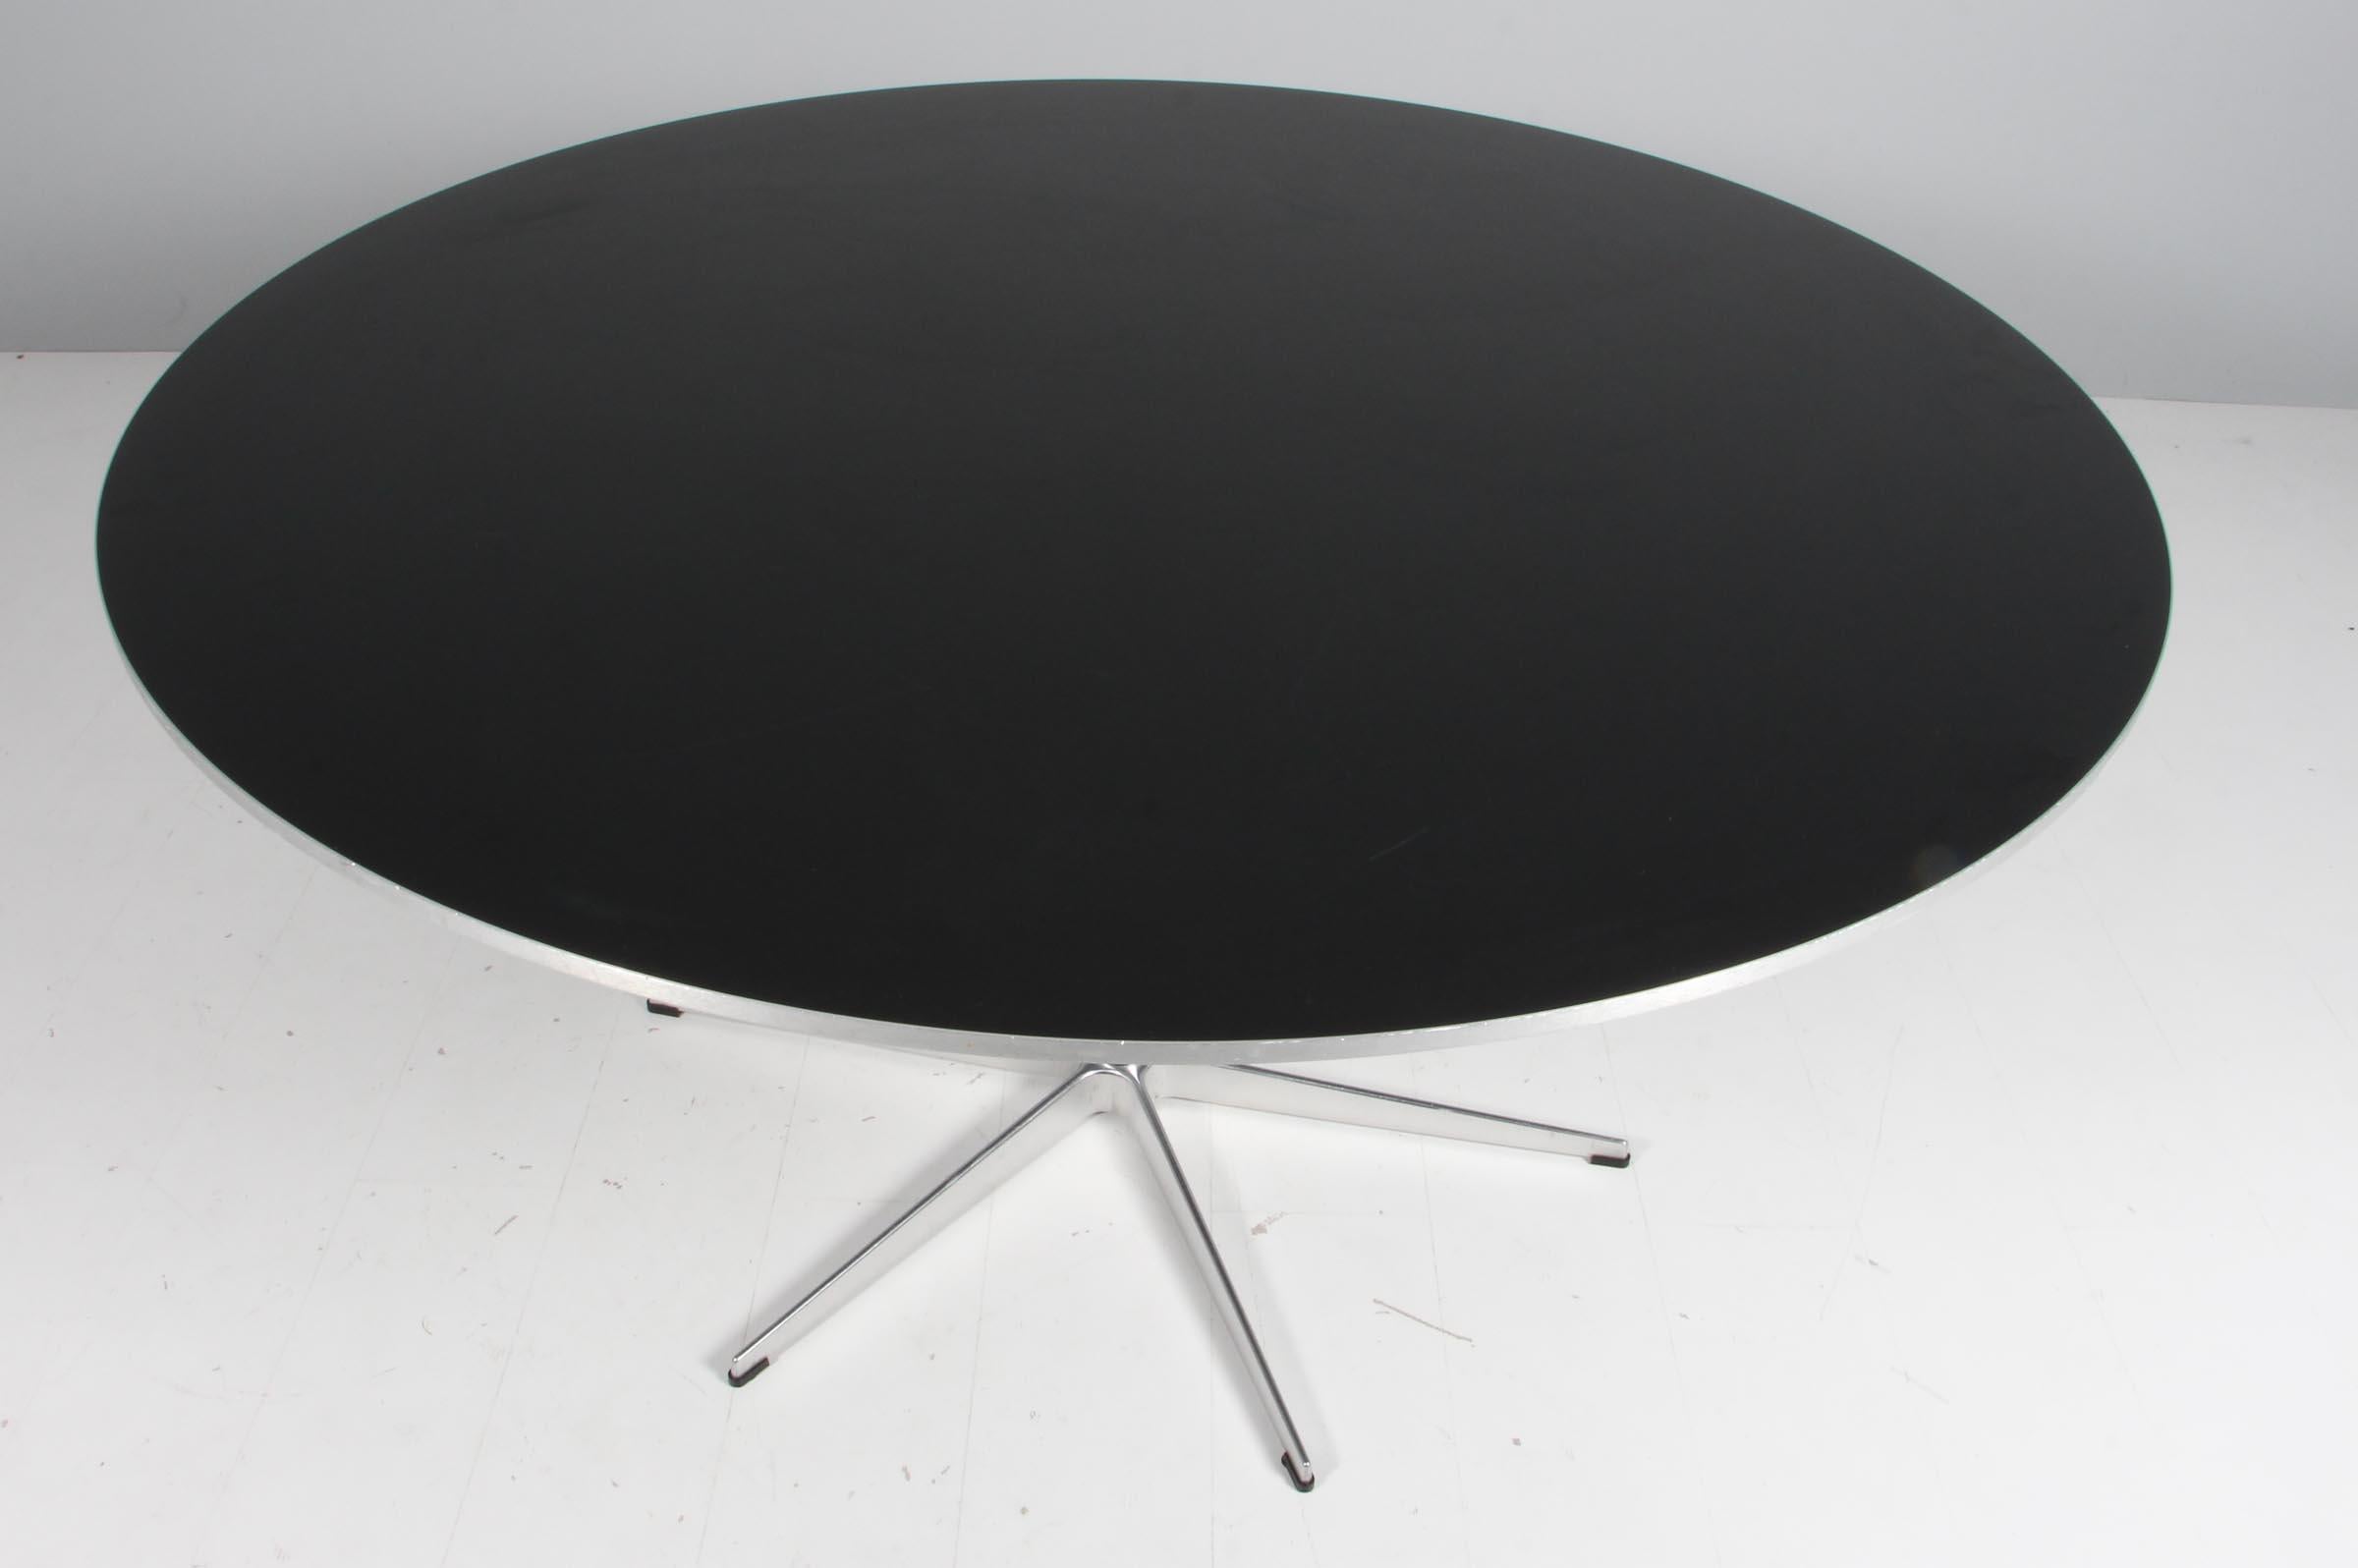 Piet Hein & Arne Jacobsen dining table with black laminate top, alu side.

Six star base of aluminium and steel.

Made by Fritz Hansen.